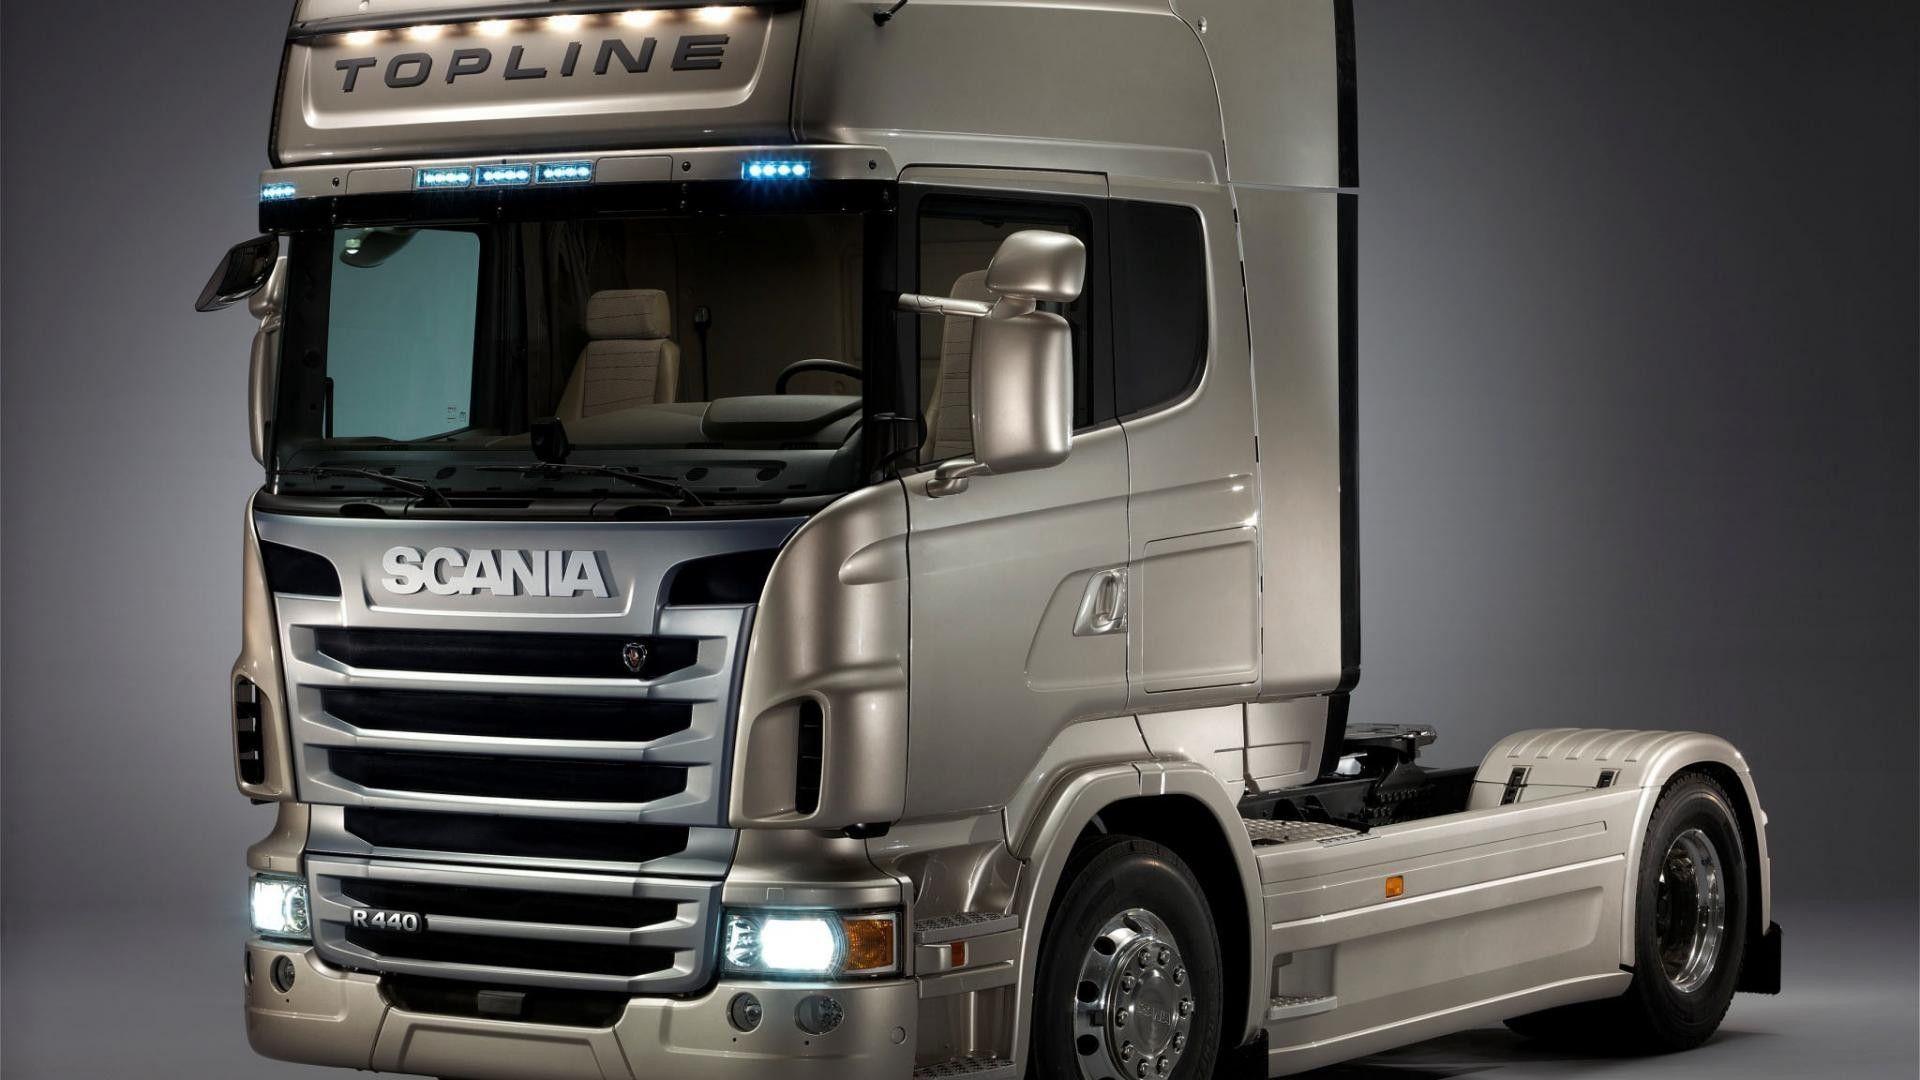 Scania Truck Wallpapers Hd